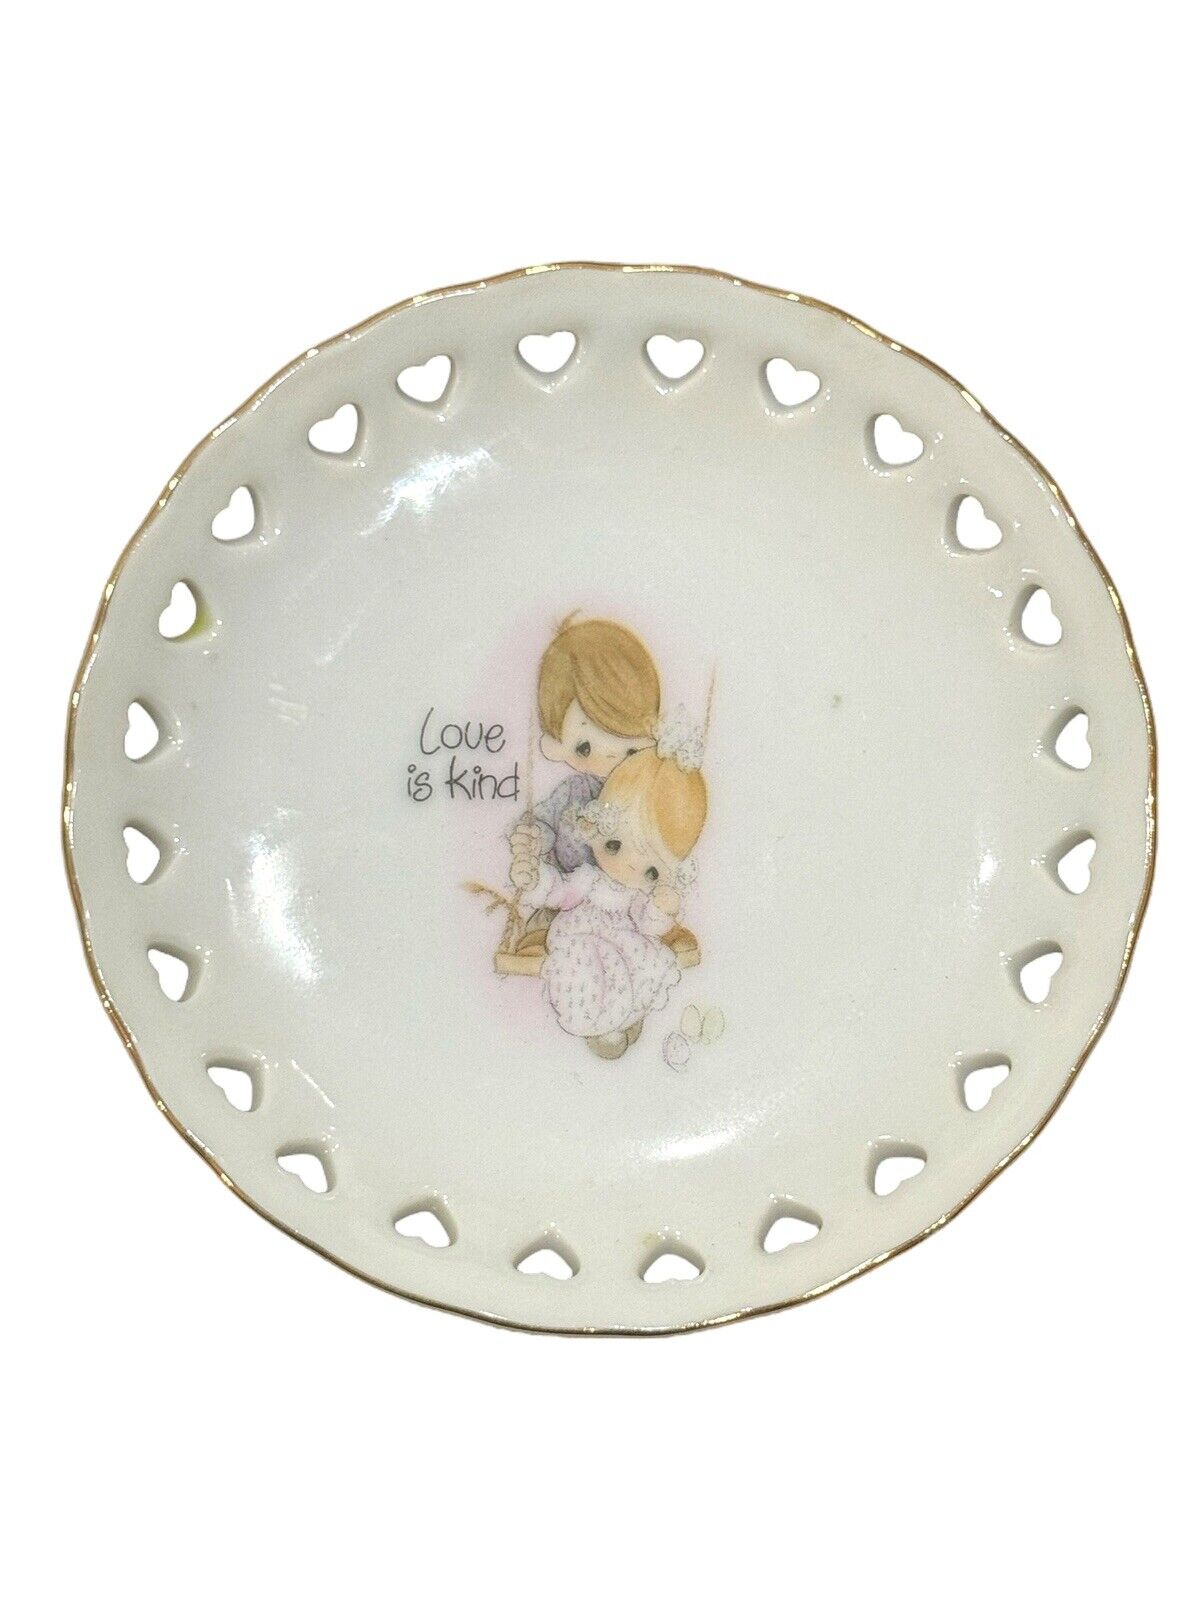 Vintage 1978 Precious Moments Sm Plate LOVE IS KIND,  ENESCO Japan Collectable 